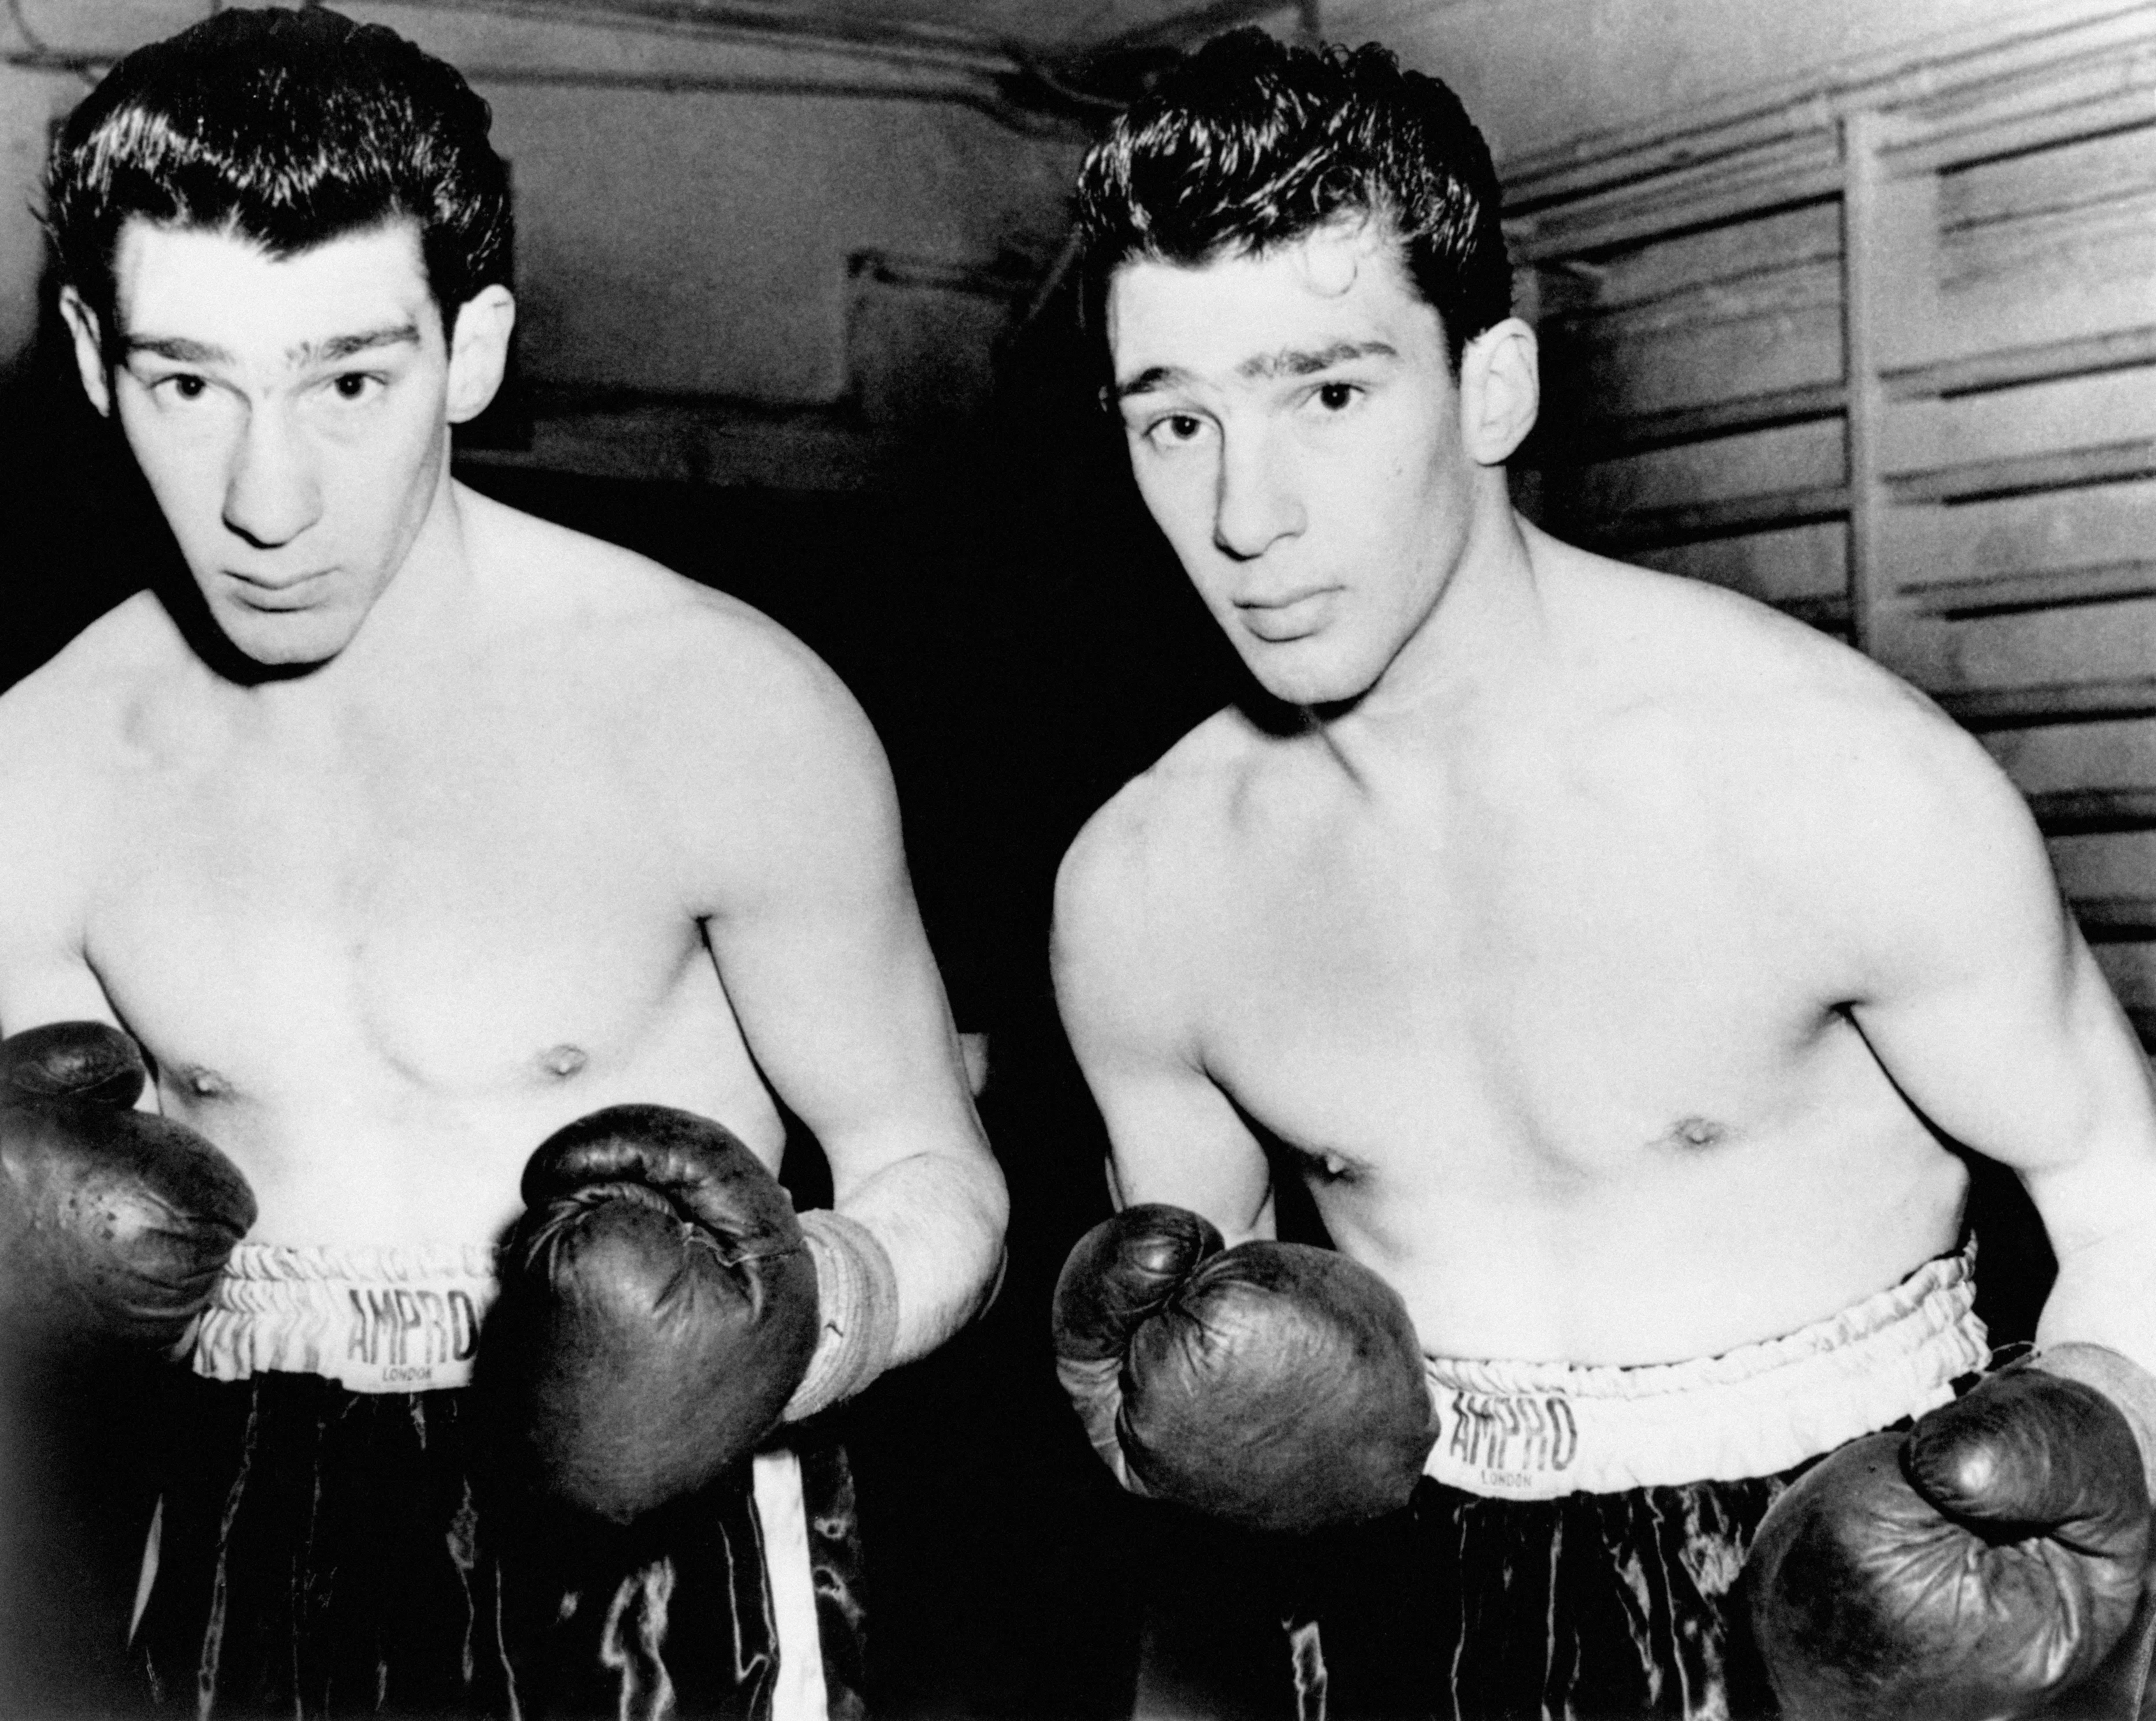 Ronnie and Reggie Kray as young men (